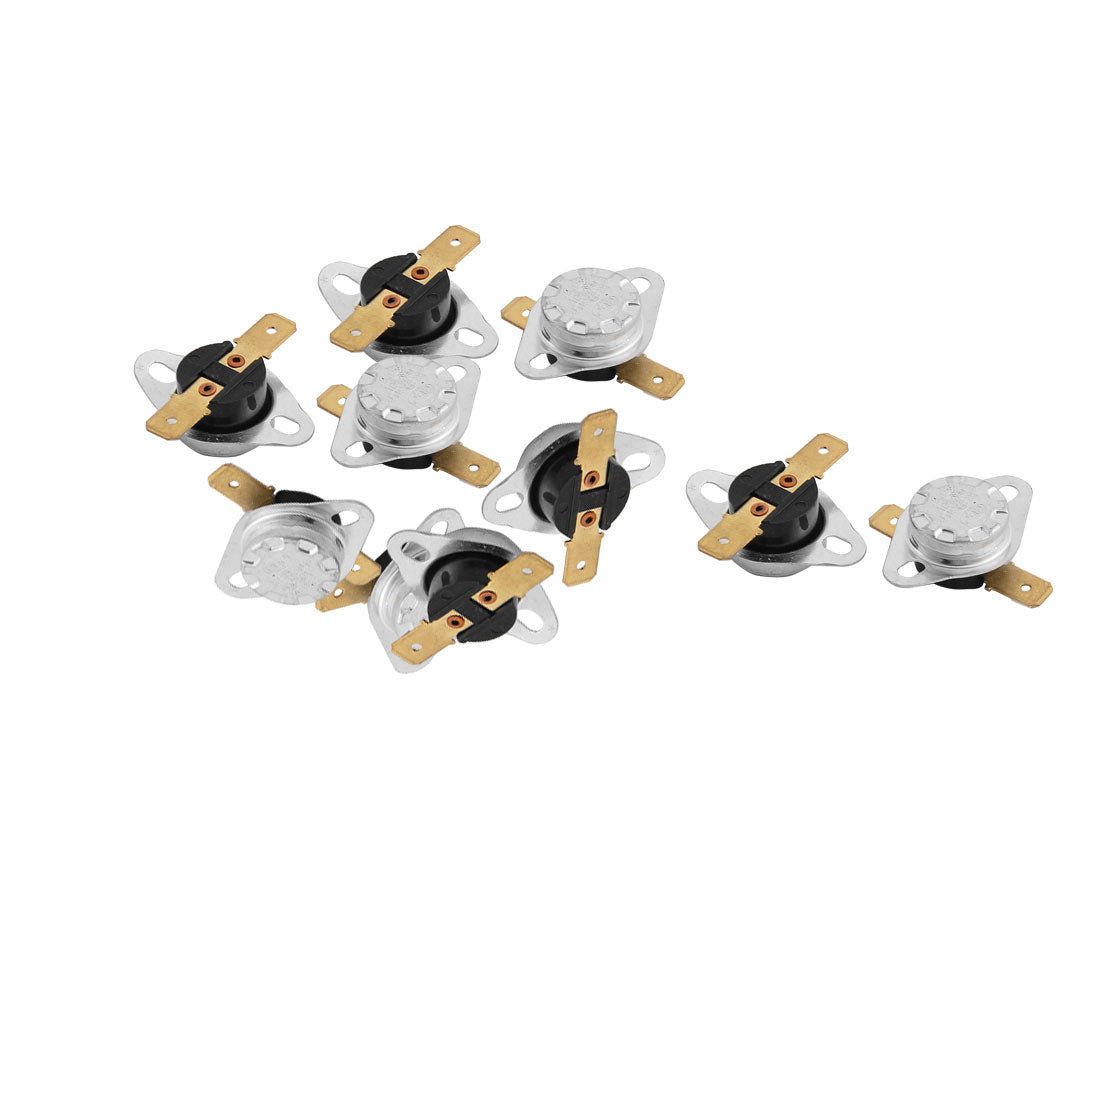 uxcell Uxcell KSD301 170 Celsius Normal Close Temperature Control Switch Thermostat 10pcs